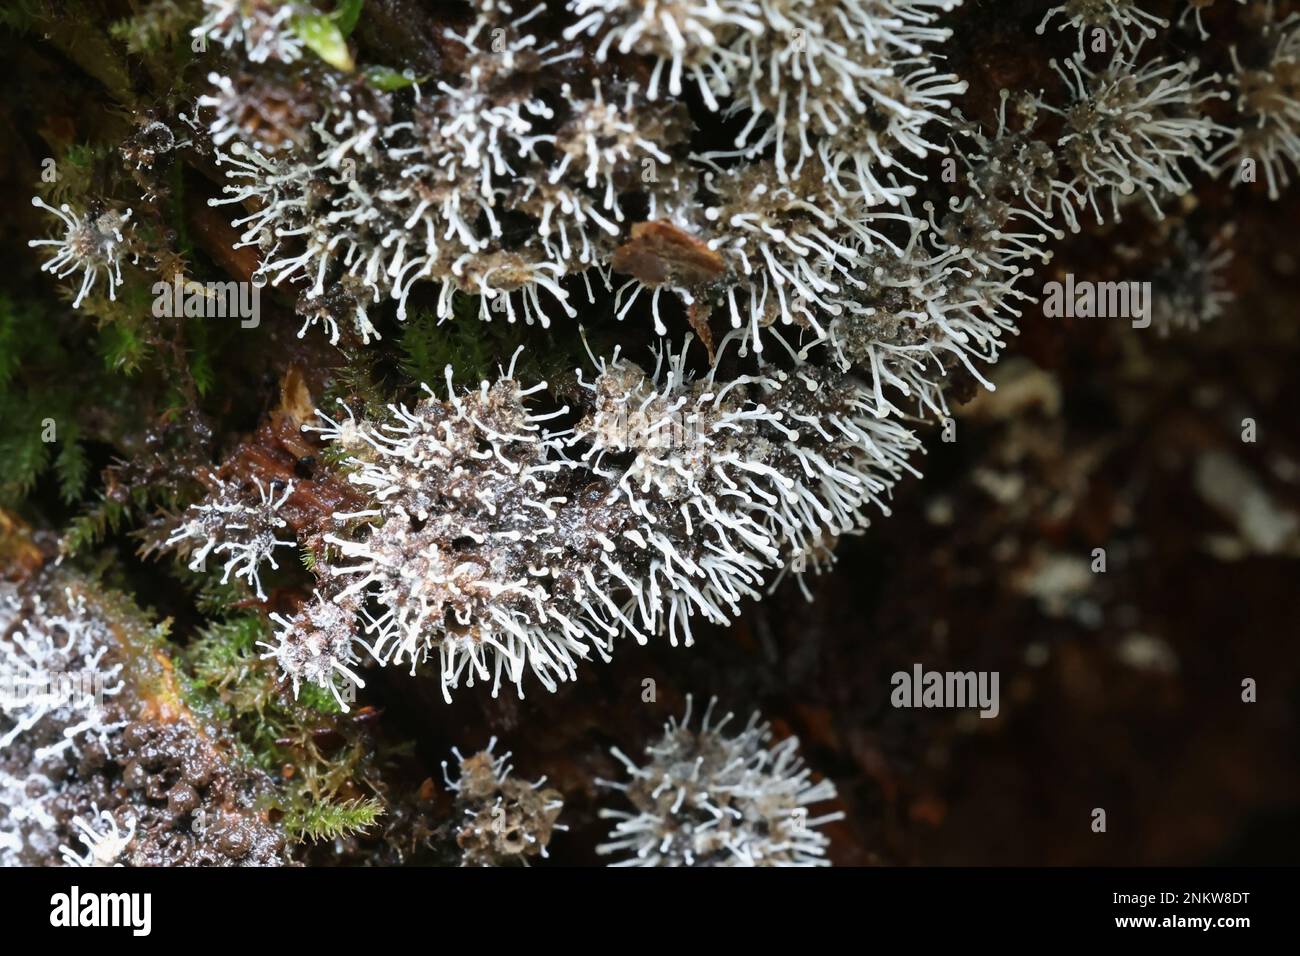 A fungus called Stilbella byssiseda, parasite on host slime mold called Cribraria argillacea Stock Photo